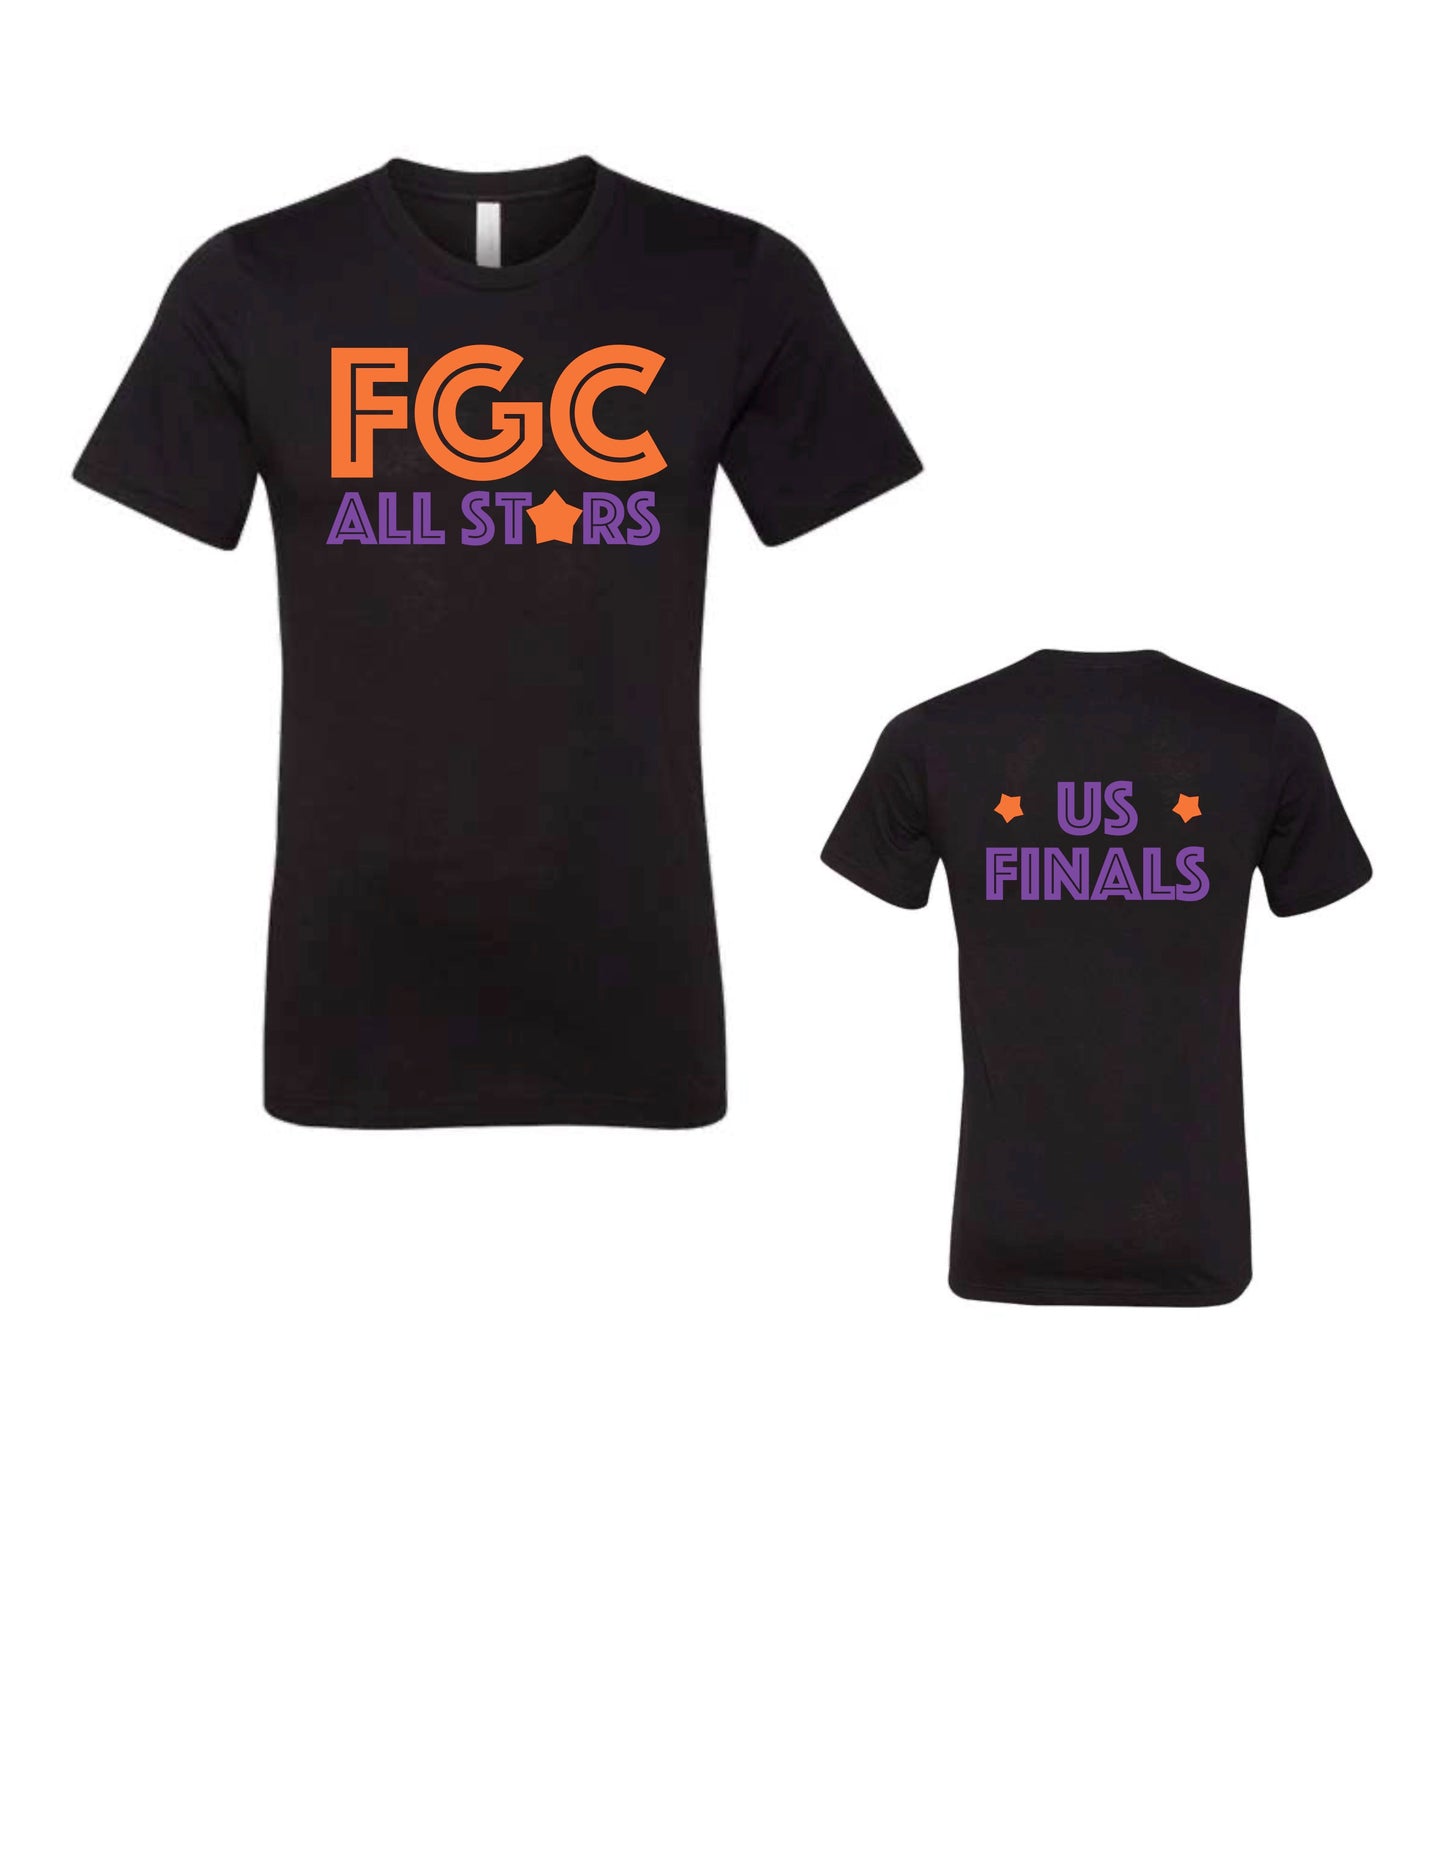 FGC All Star Tee